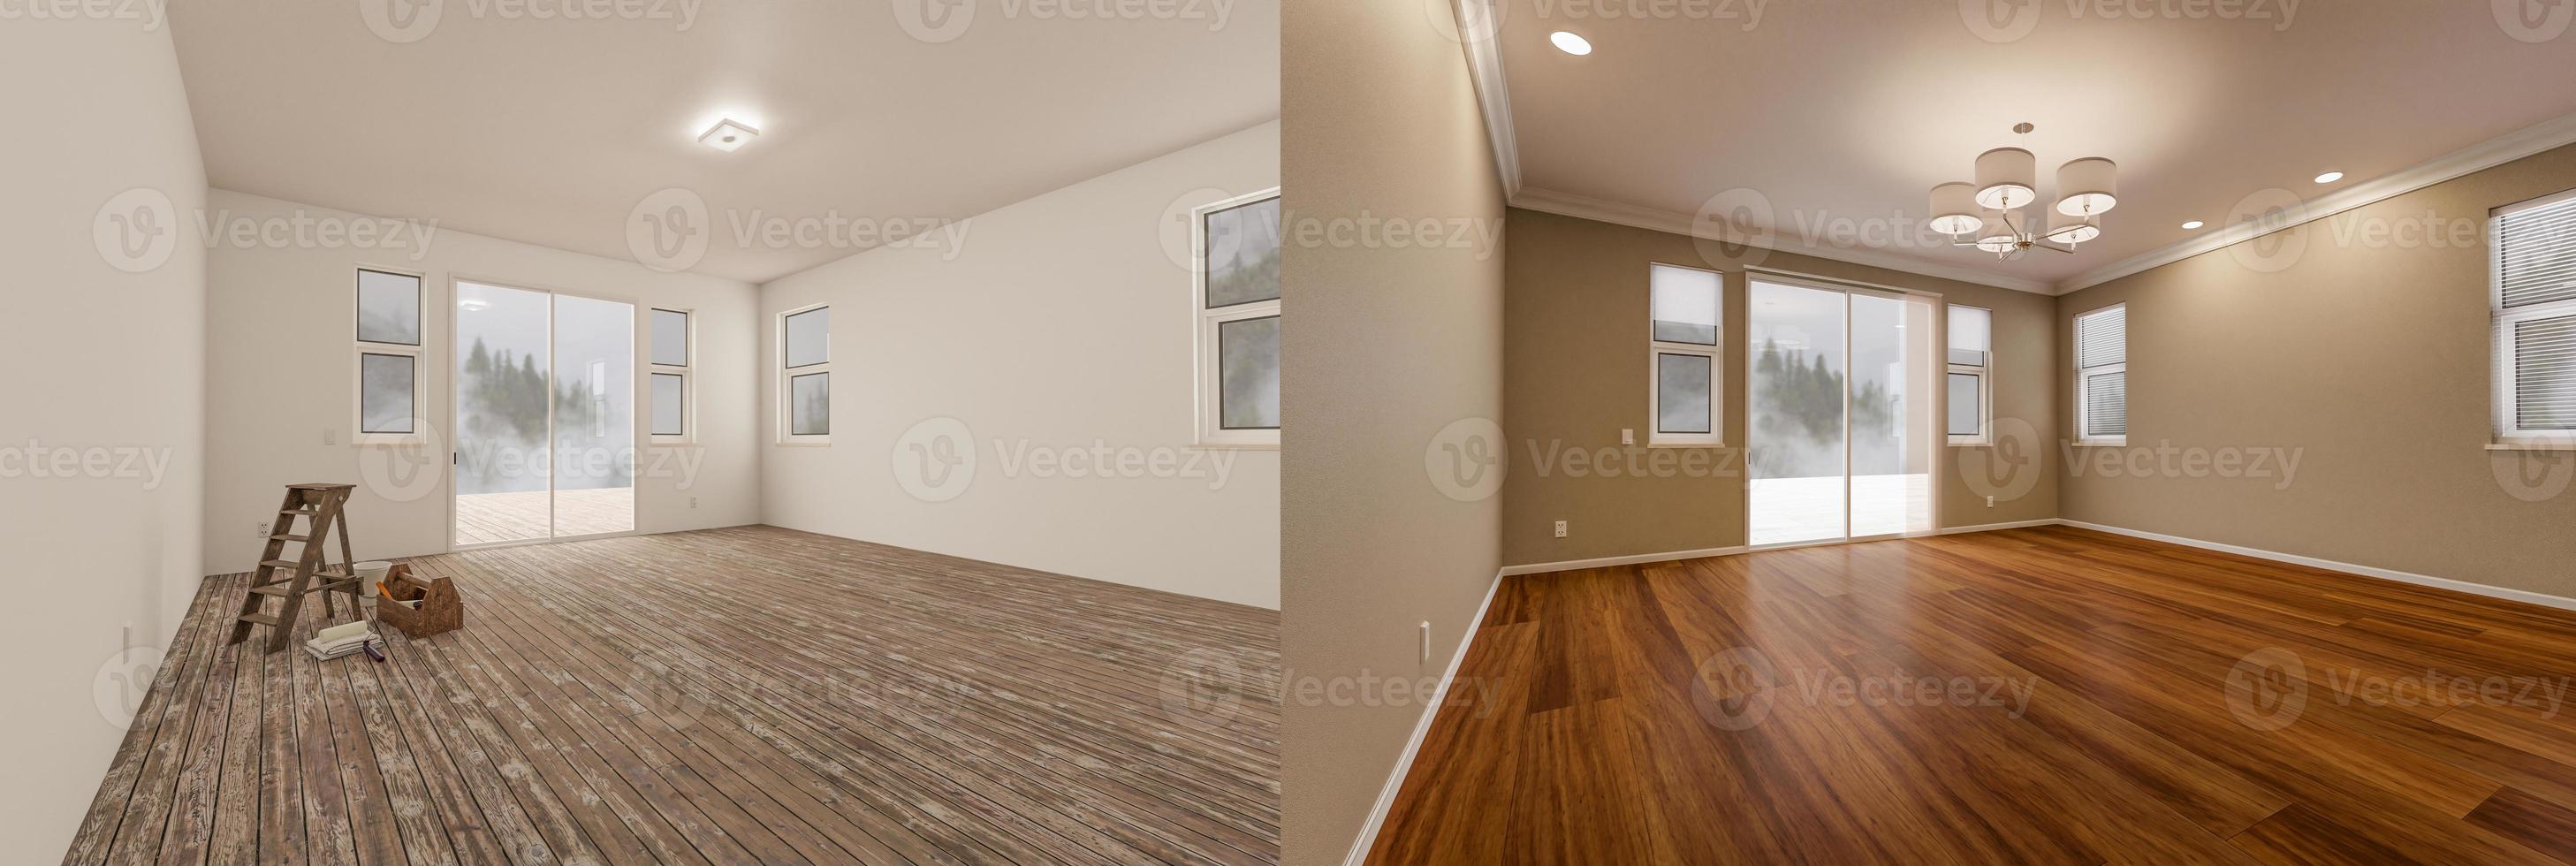 Before and After of Unfinished Raw and Newly Remodeled Room Of House with Finished Wood Floors, Moulding, Paint and Ceiling Lights. photo